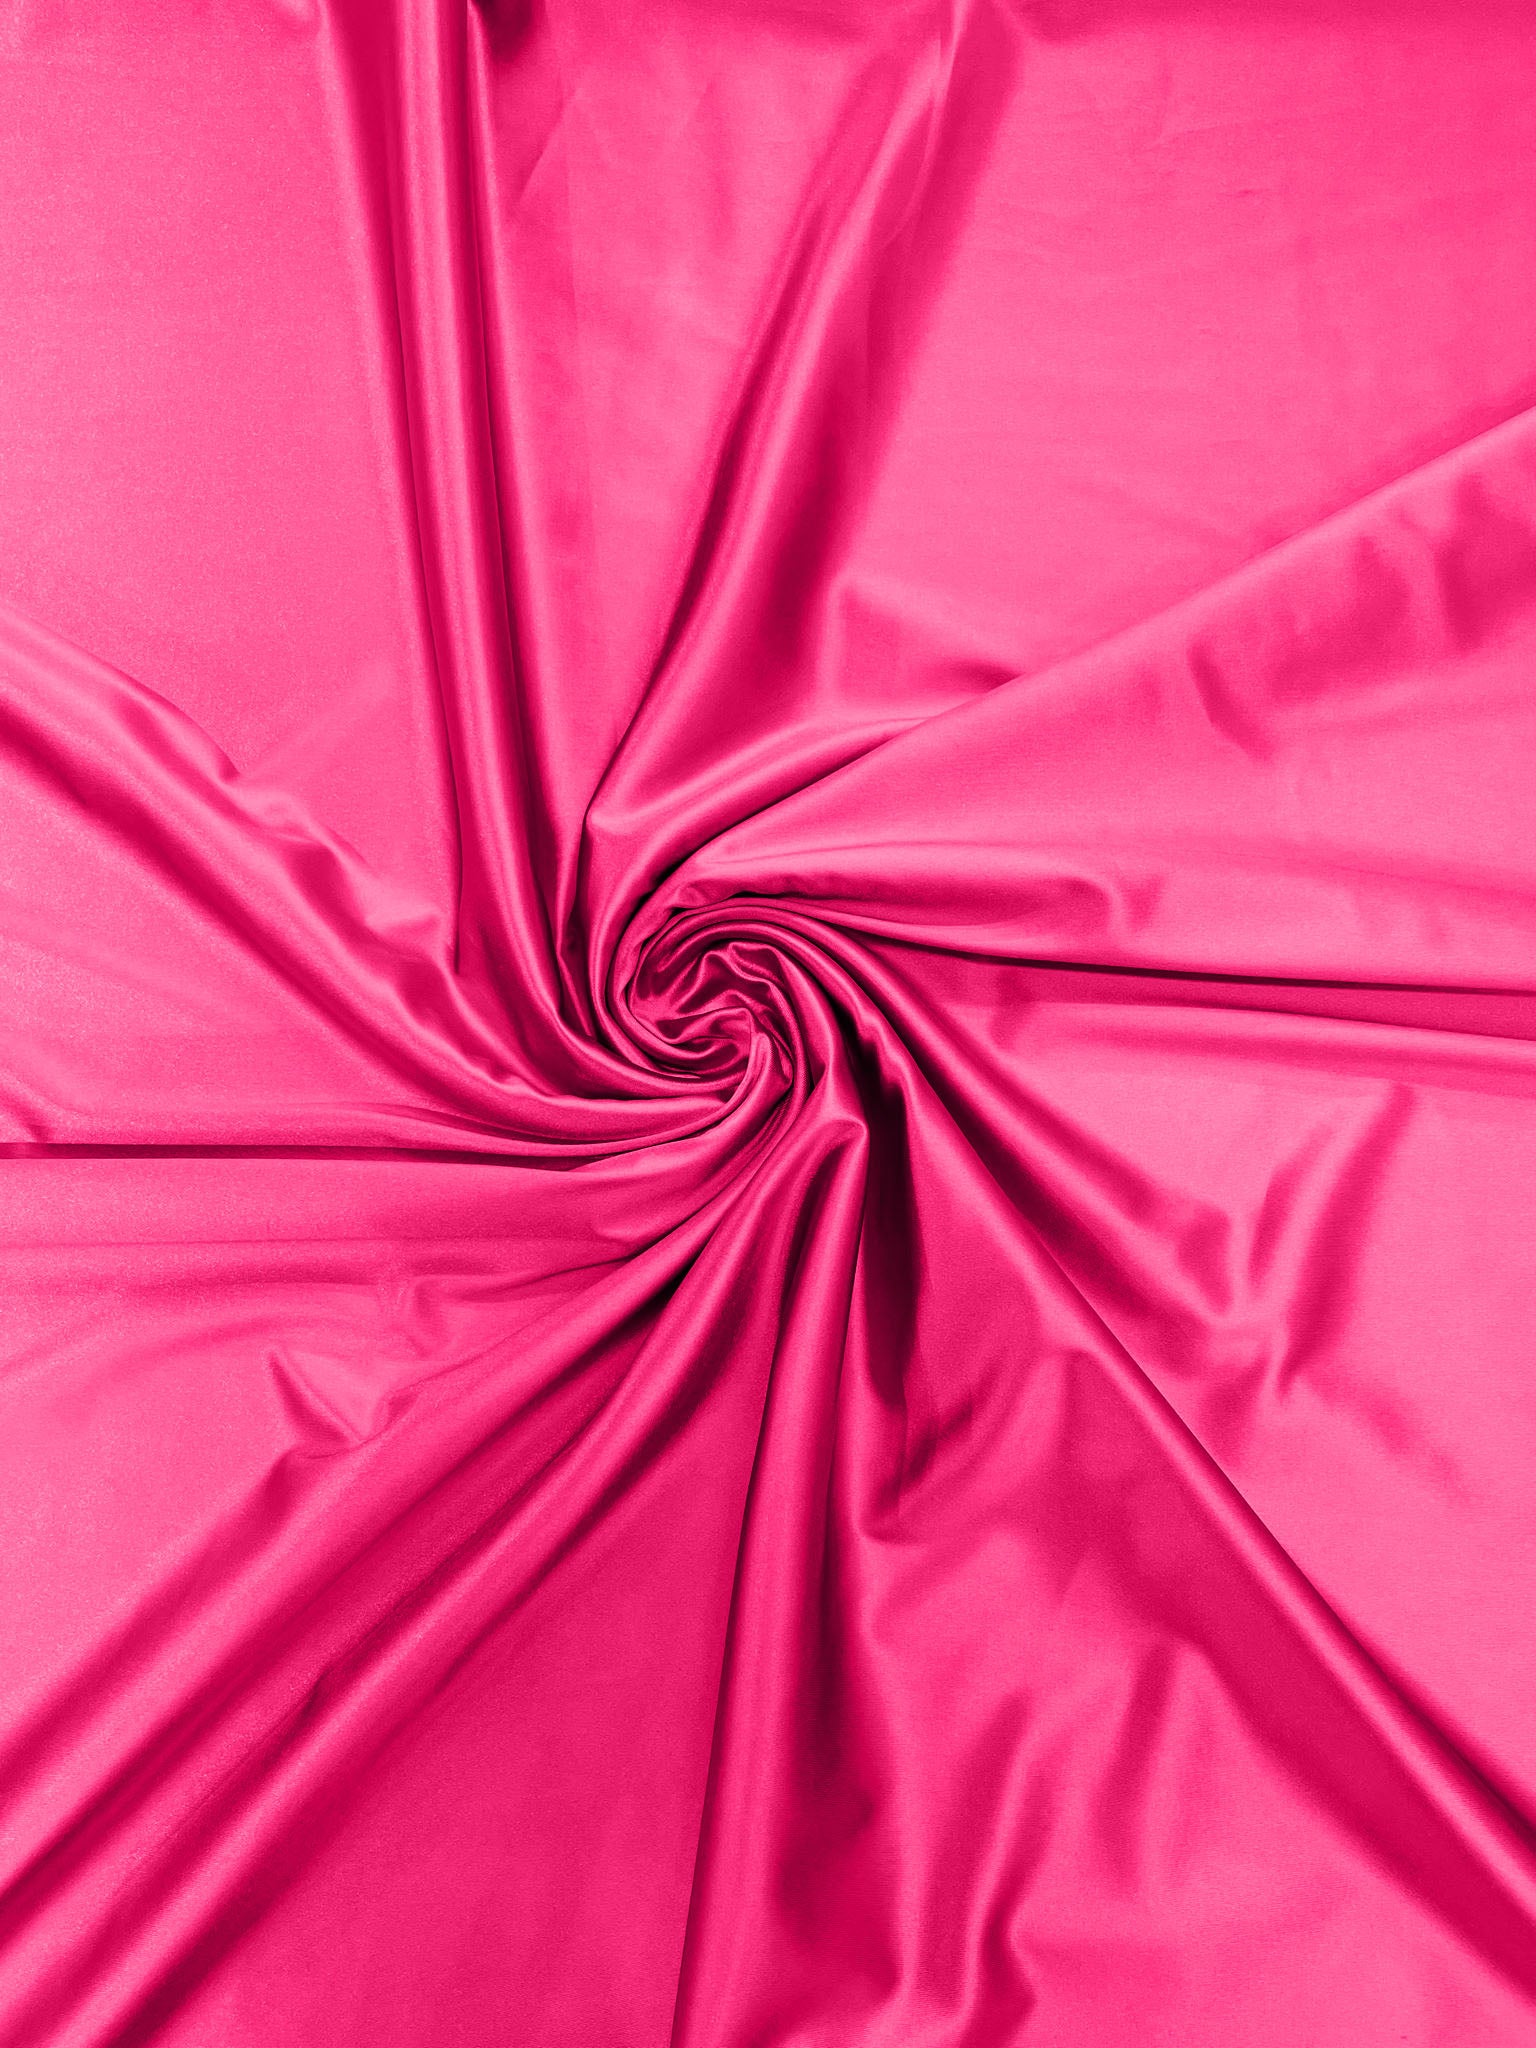 Neon Hot Pink Heavy Shiny Satin Stretch Spandex Fabric/58 Inches Wide/Prom/Wedding/Cosplays.